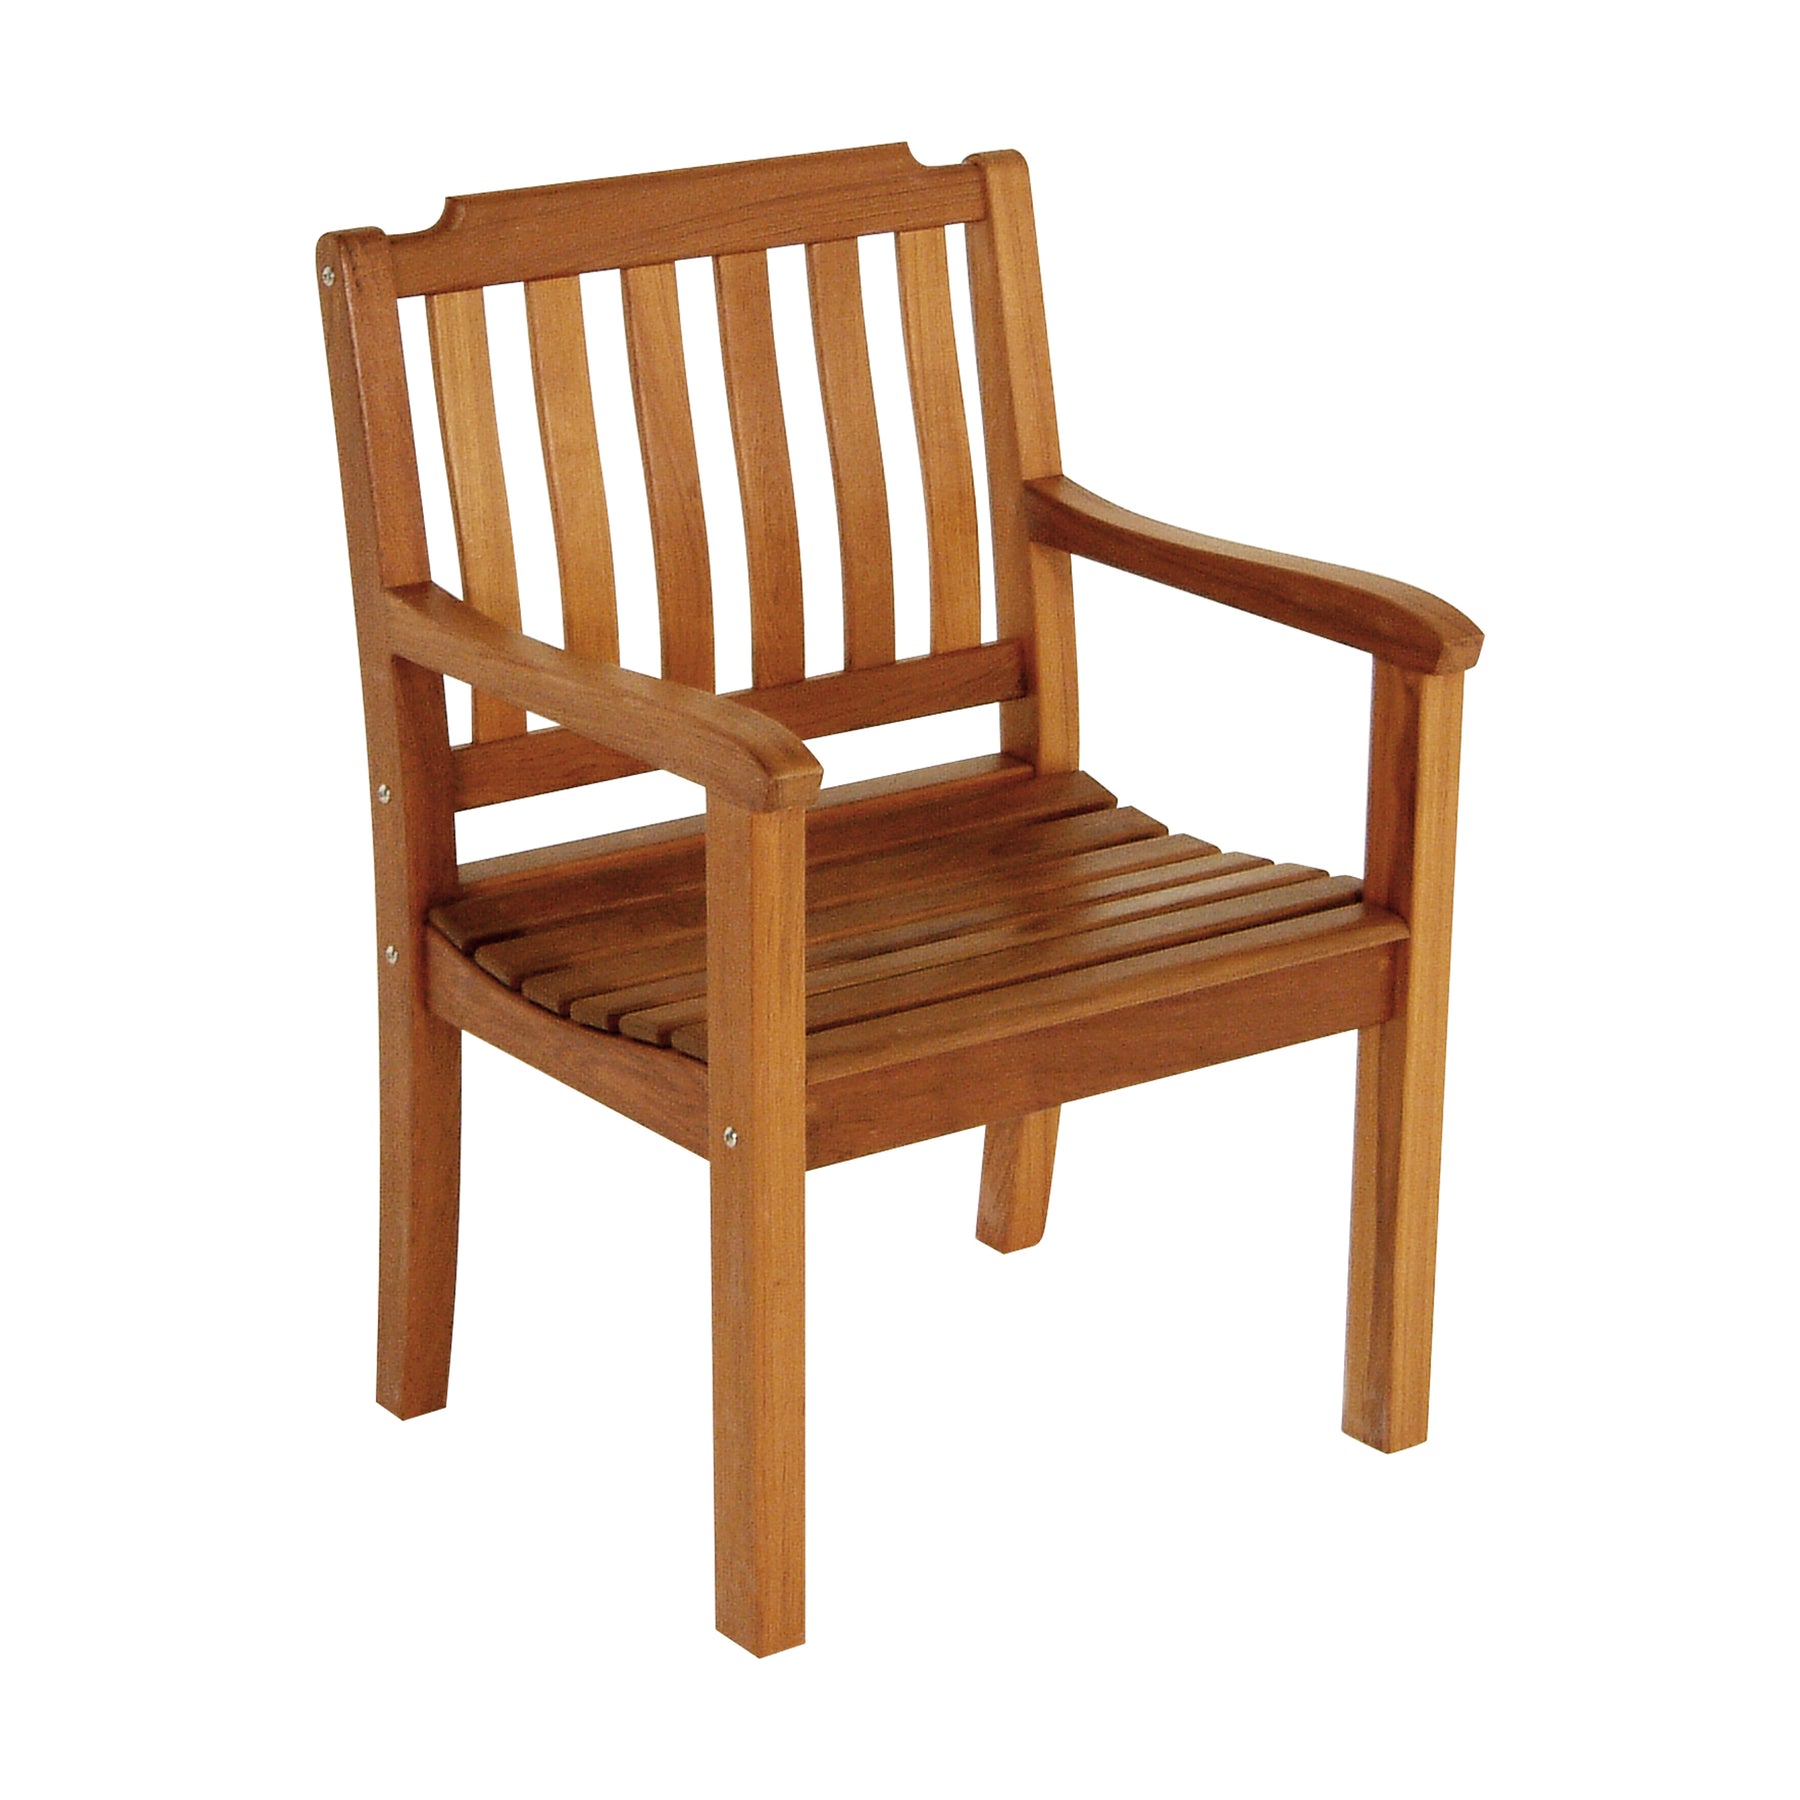 Garden Chair with Arms - 60065